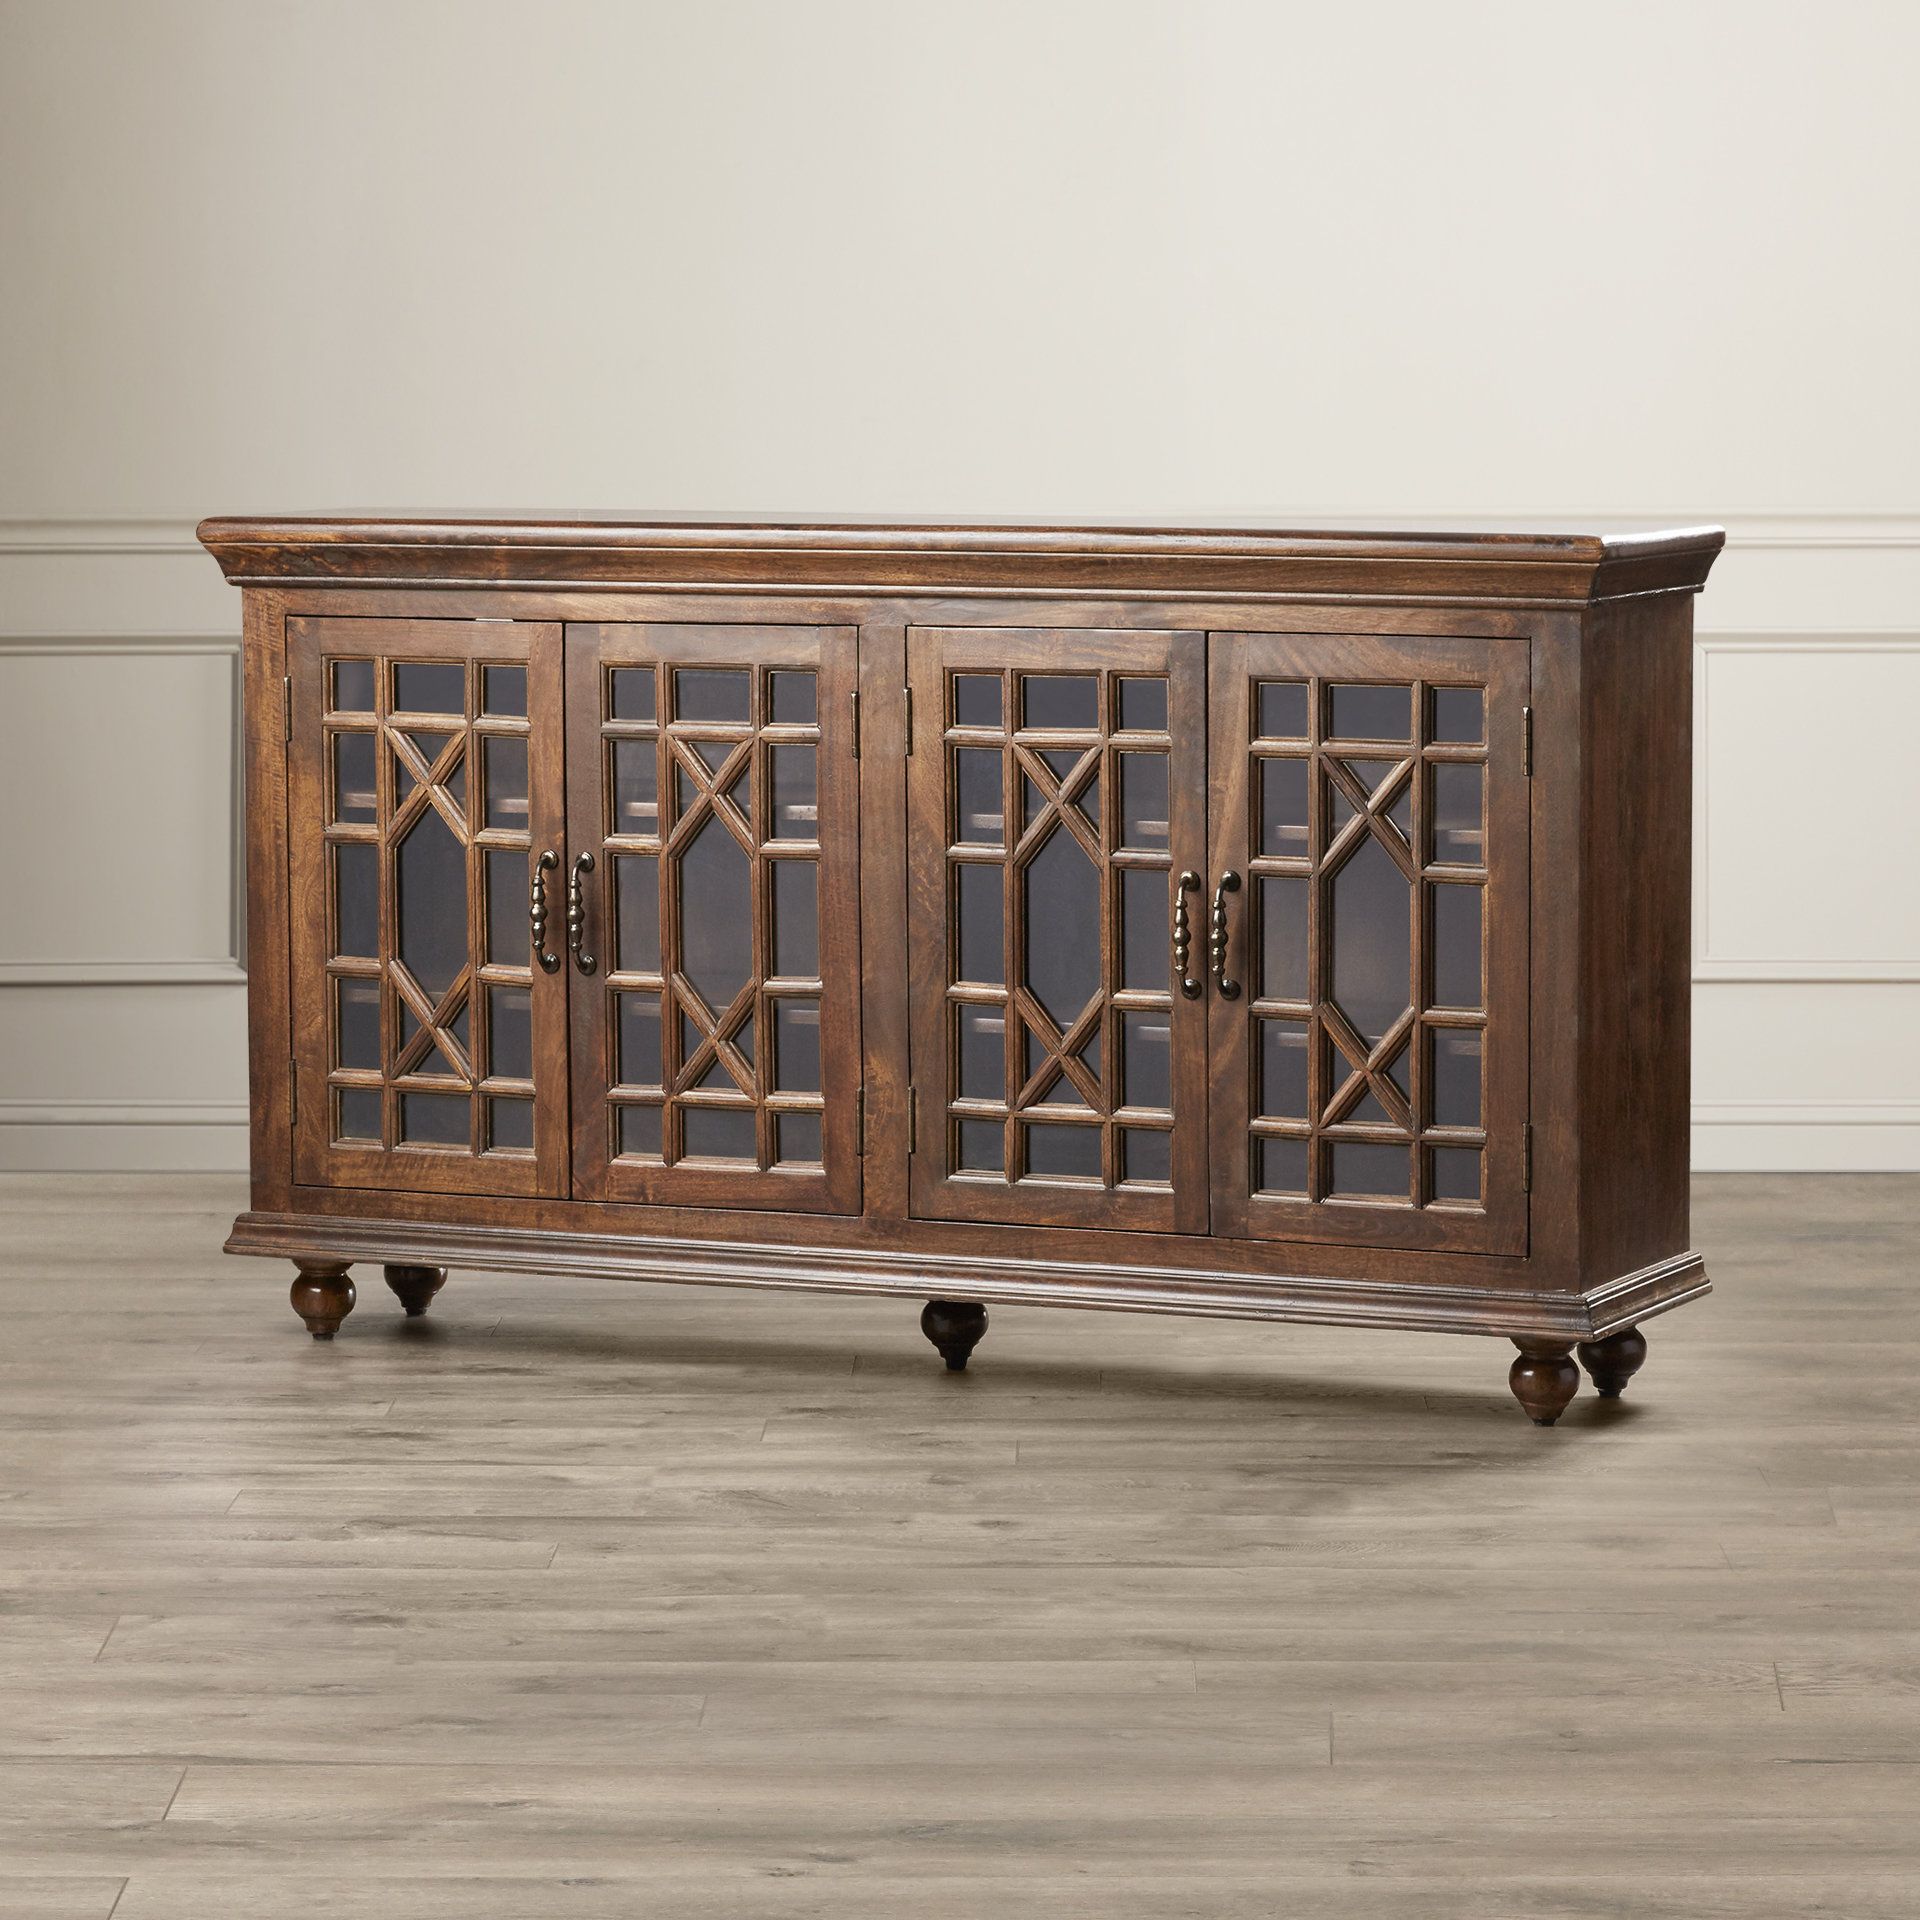 Darby Home Co Sideboards & Buffets You'll Love In 2019 | Wayfair With Regard To Velazco Sideboards (View 24 of 30)